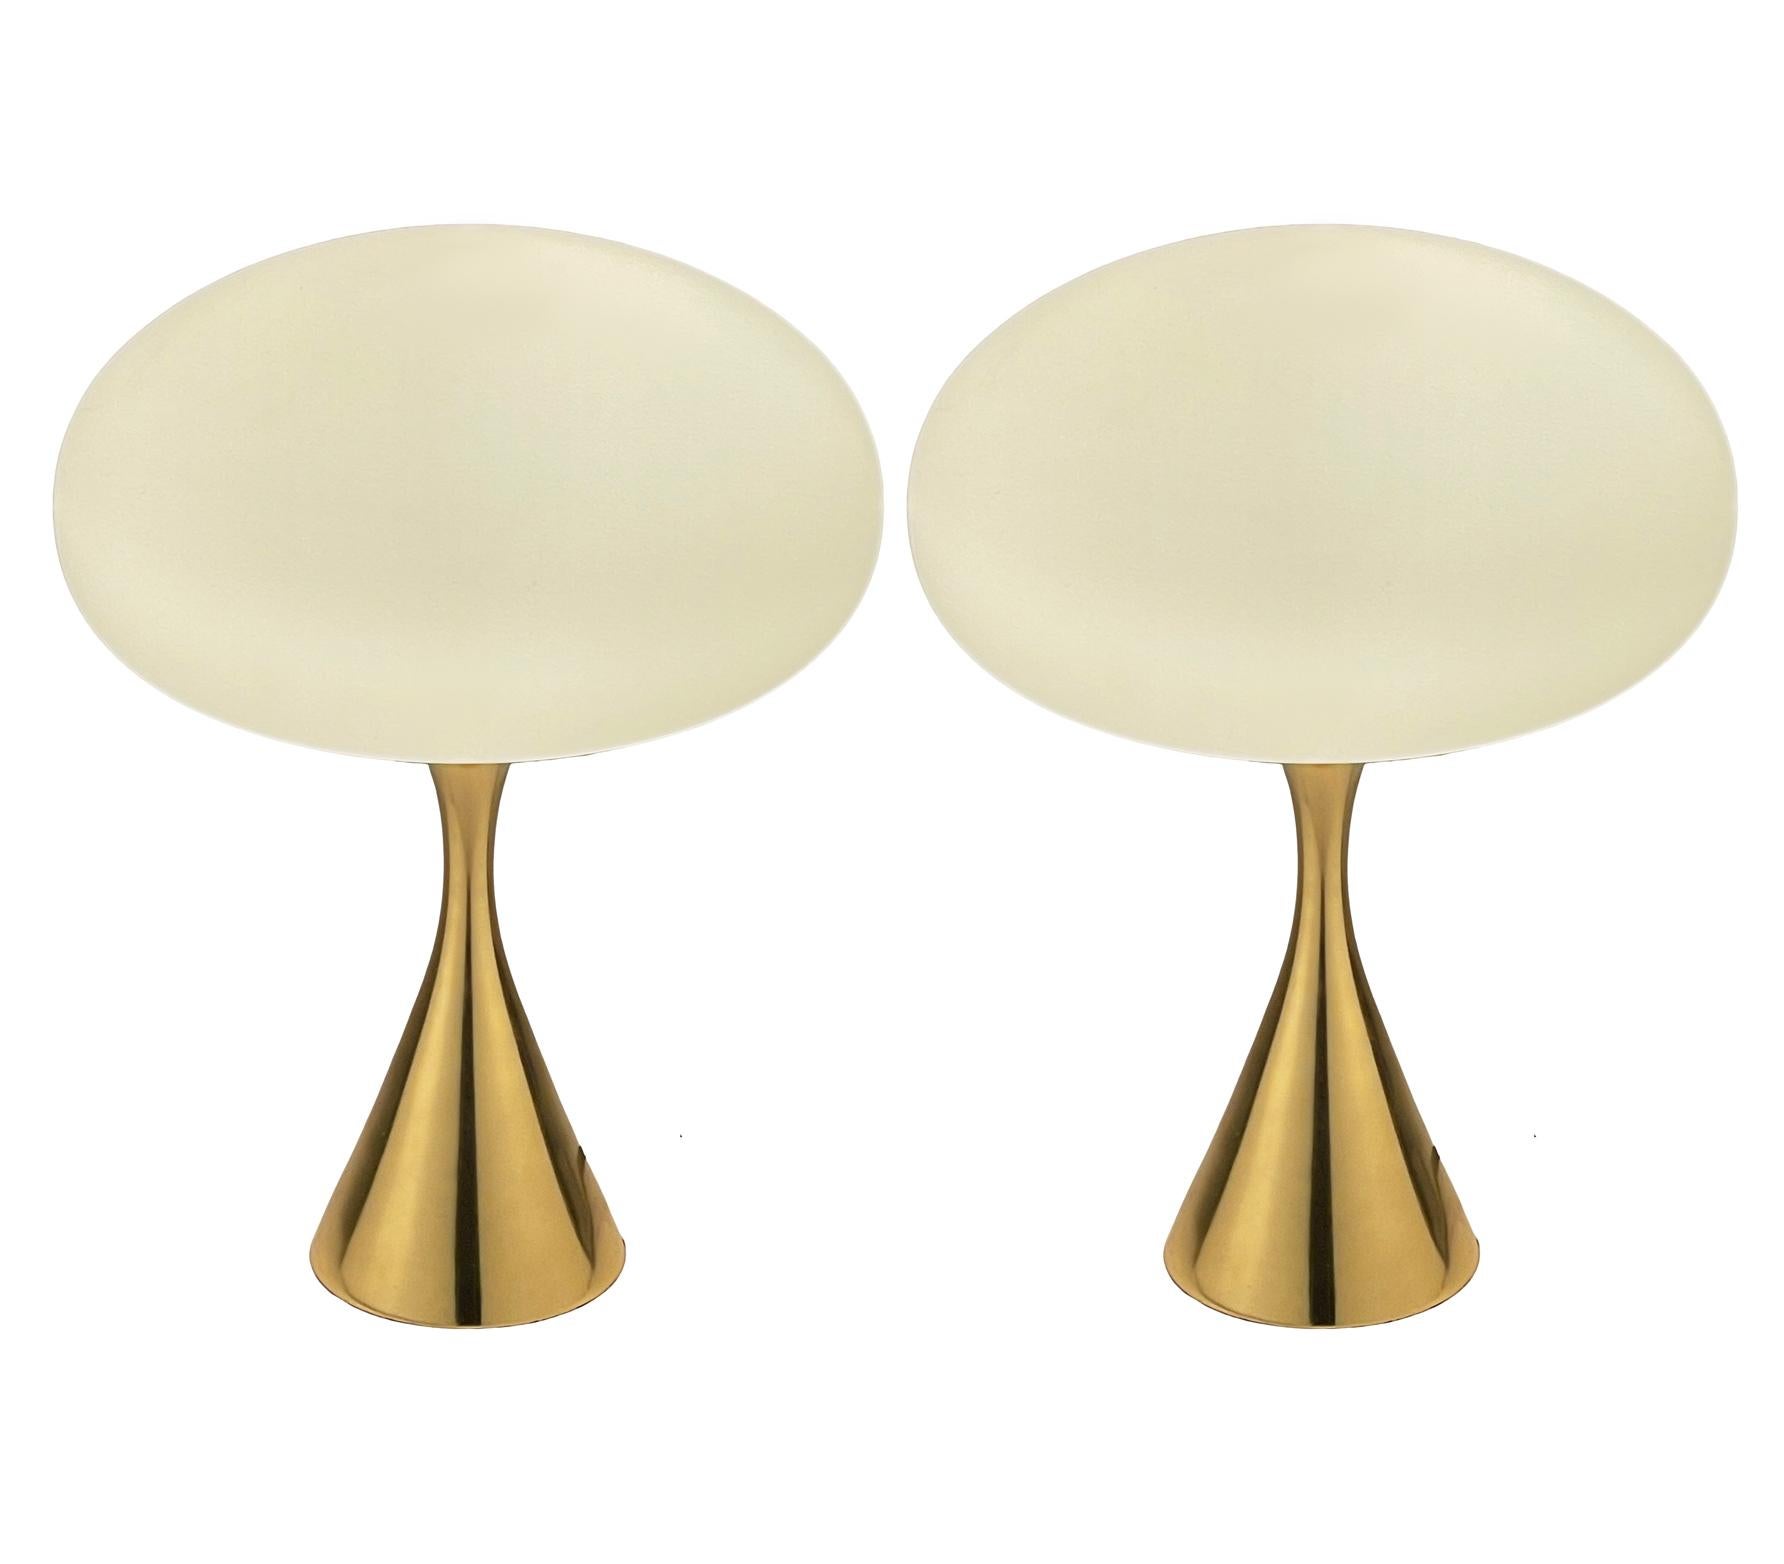 Pair of Mid-Century Modern Table Lamps by Designline in Brass & White Glass In New Condition For Sale In Philadelphia, PA